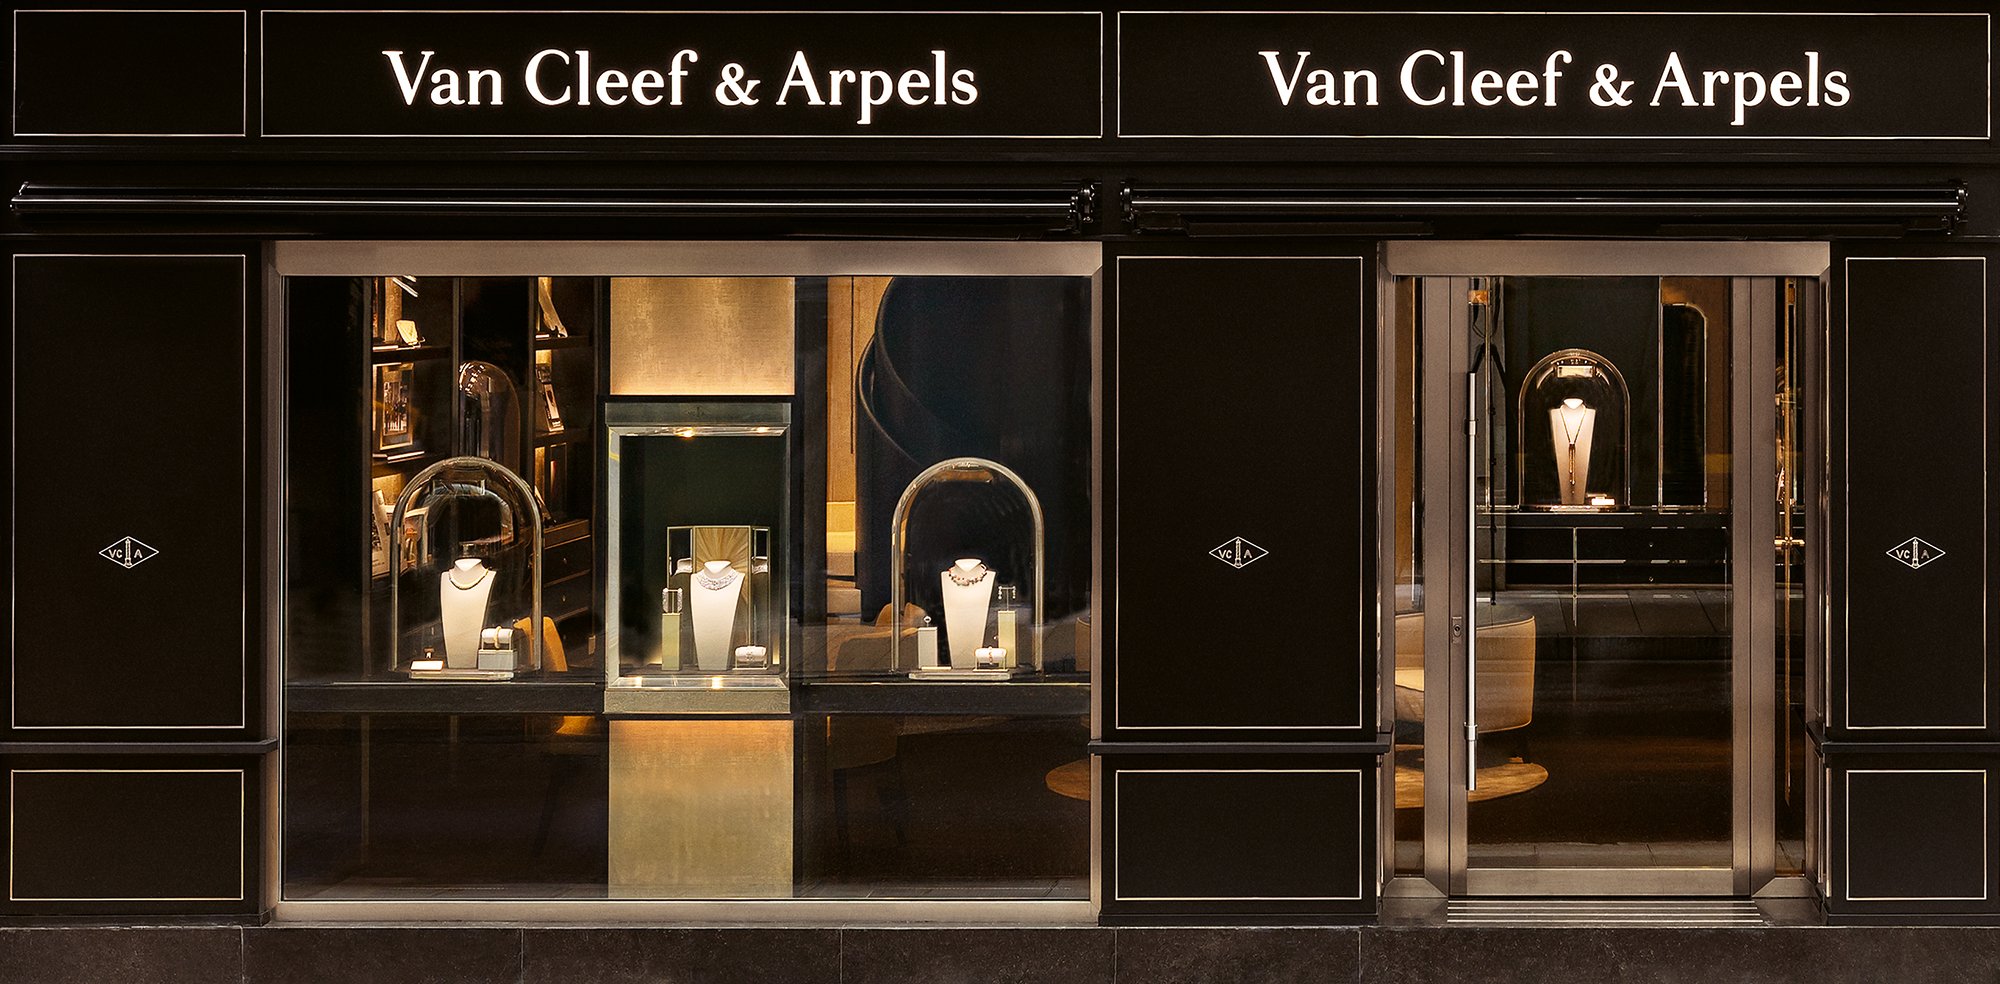 Van Cleef & Arpels: continuity in a disruptive world